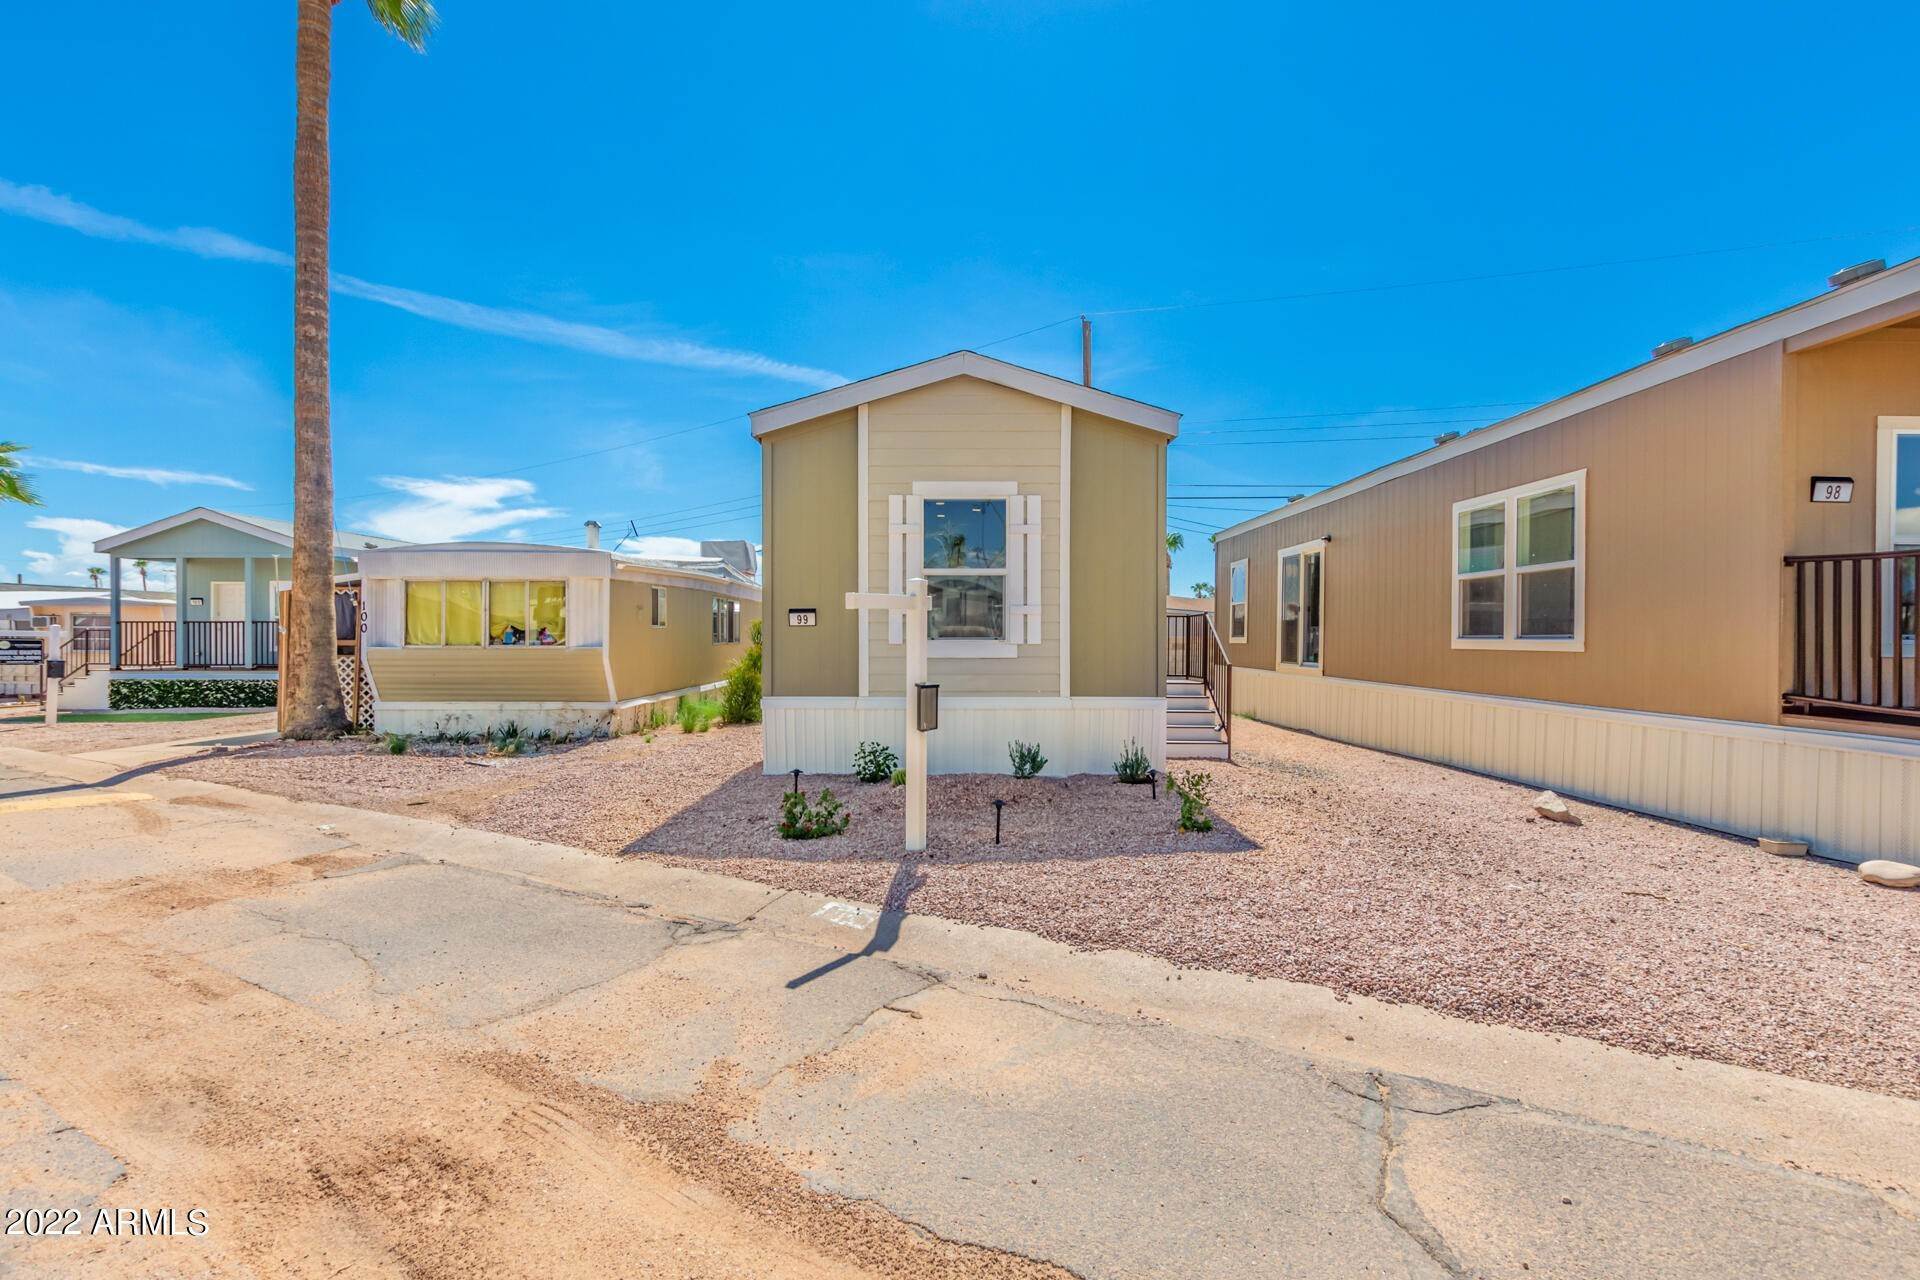 15. Manufactured Home for Sale at Mesa, AZ 85207